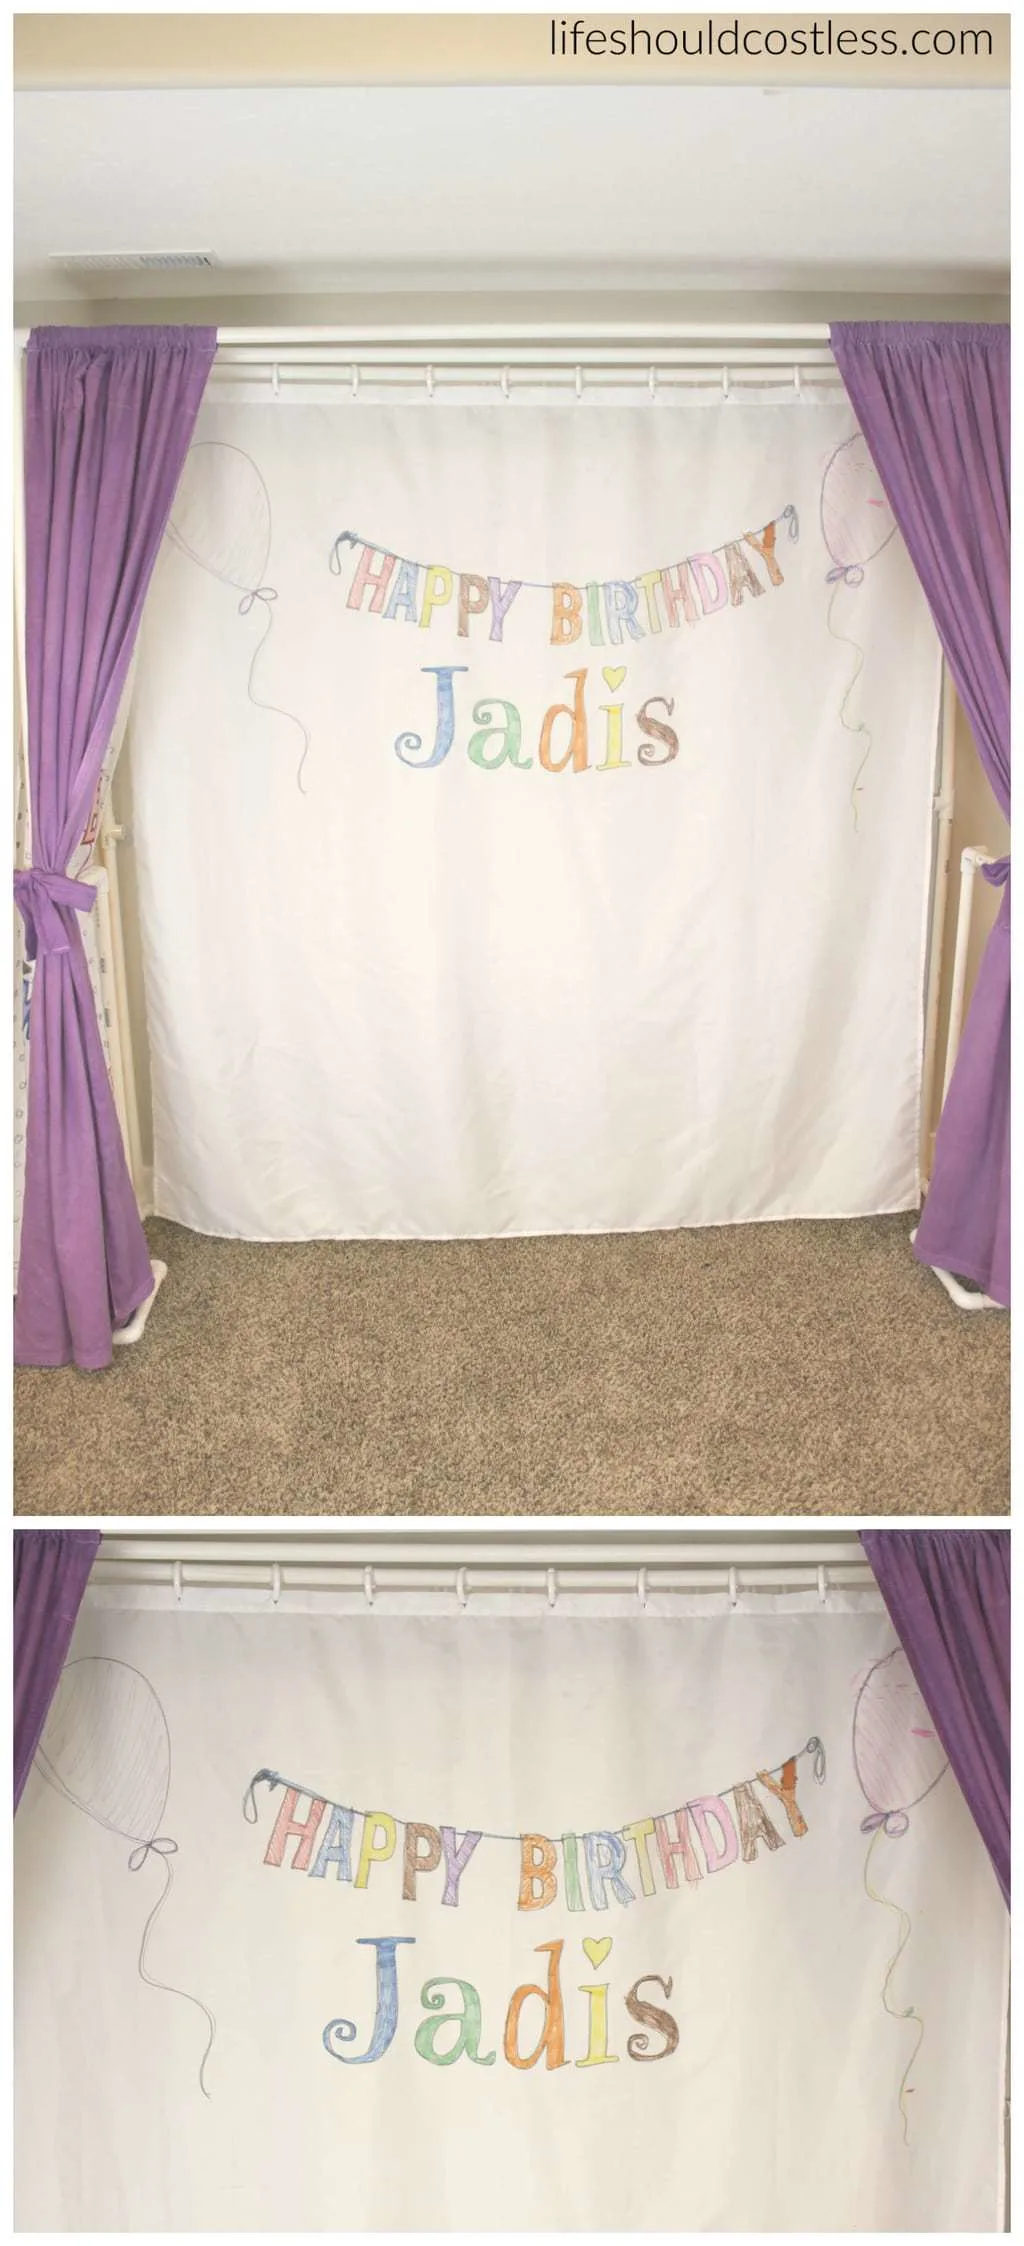 Multi-Use PVC Theater with washable and glow-in-the-dark backdrop options. The "thneed" of PVC theaters! It is so veratile that you can do almost anything. Best PVC project for kids. Used as a washable Birthday banner.